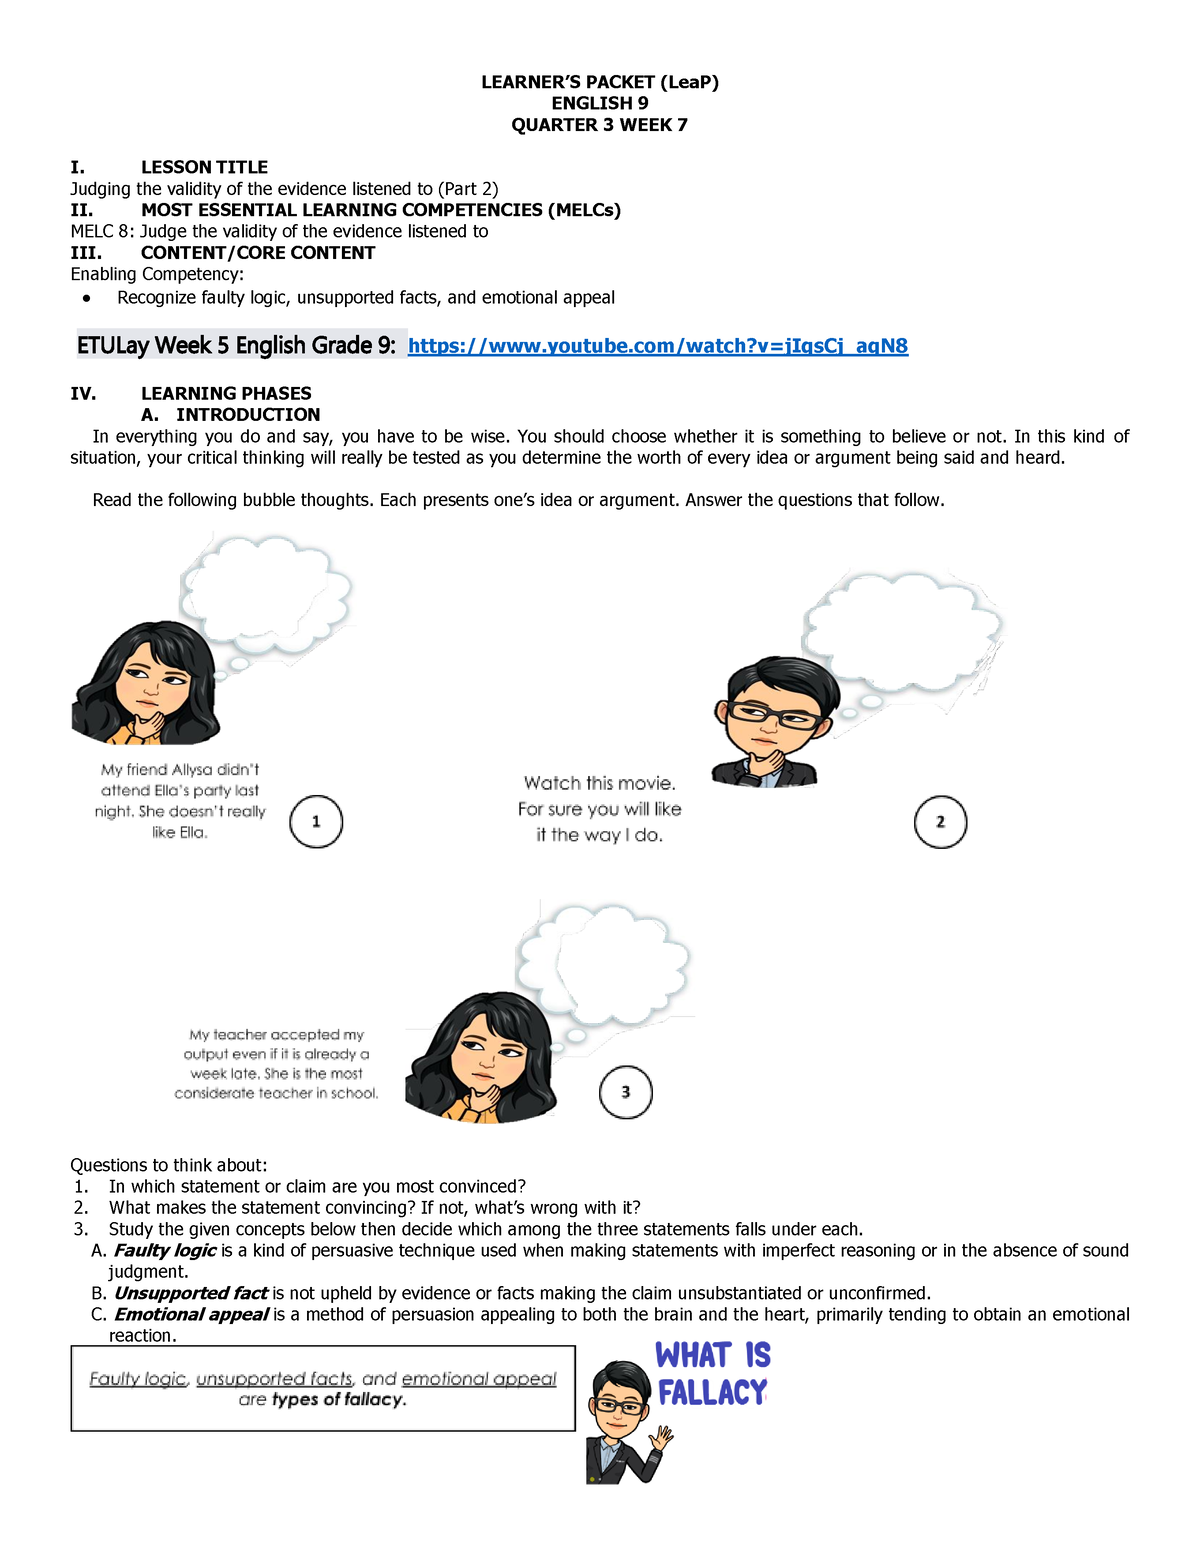 Leap English 9 Week 7 Leap Learners Packet Leap English 9 Quarter 3 Week 7 I Lesson 8795